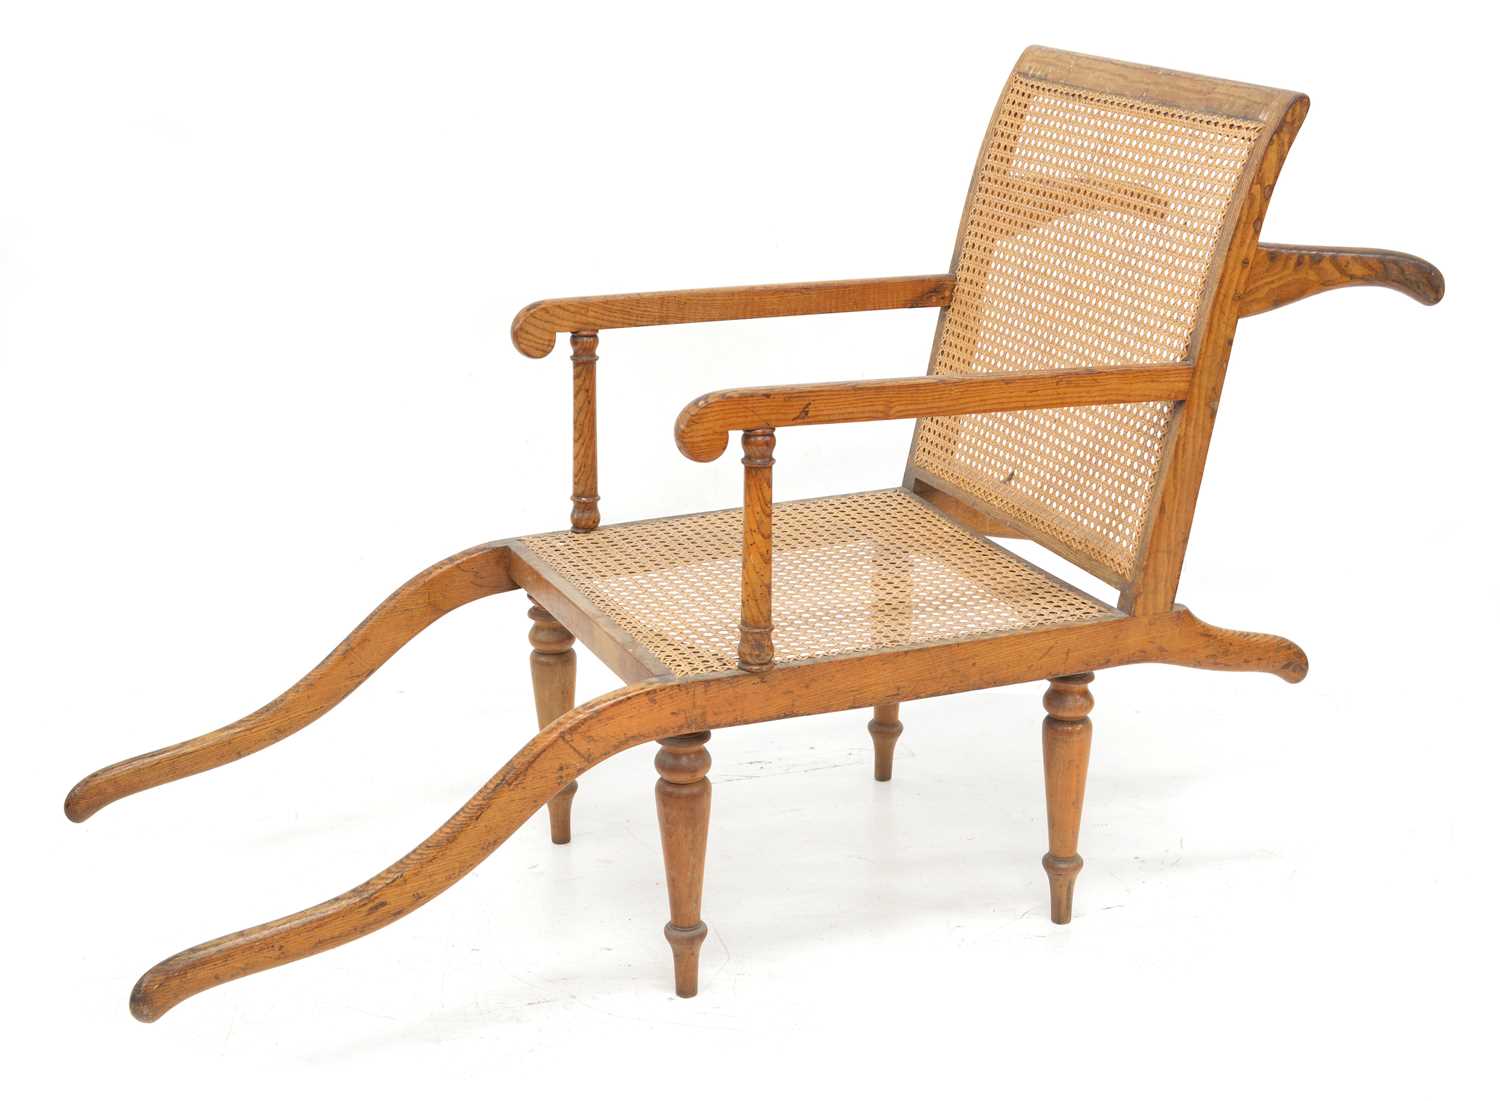 Early 20th-century open arm invalid chair